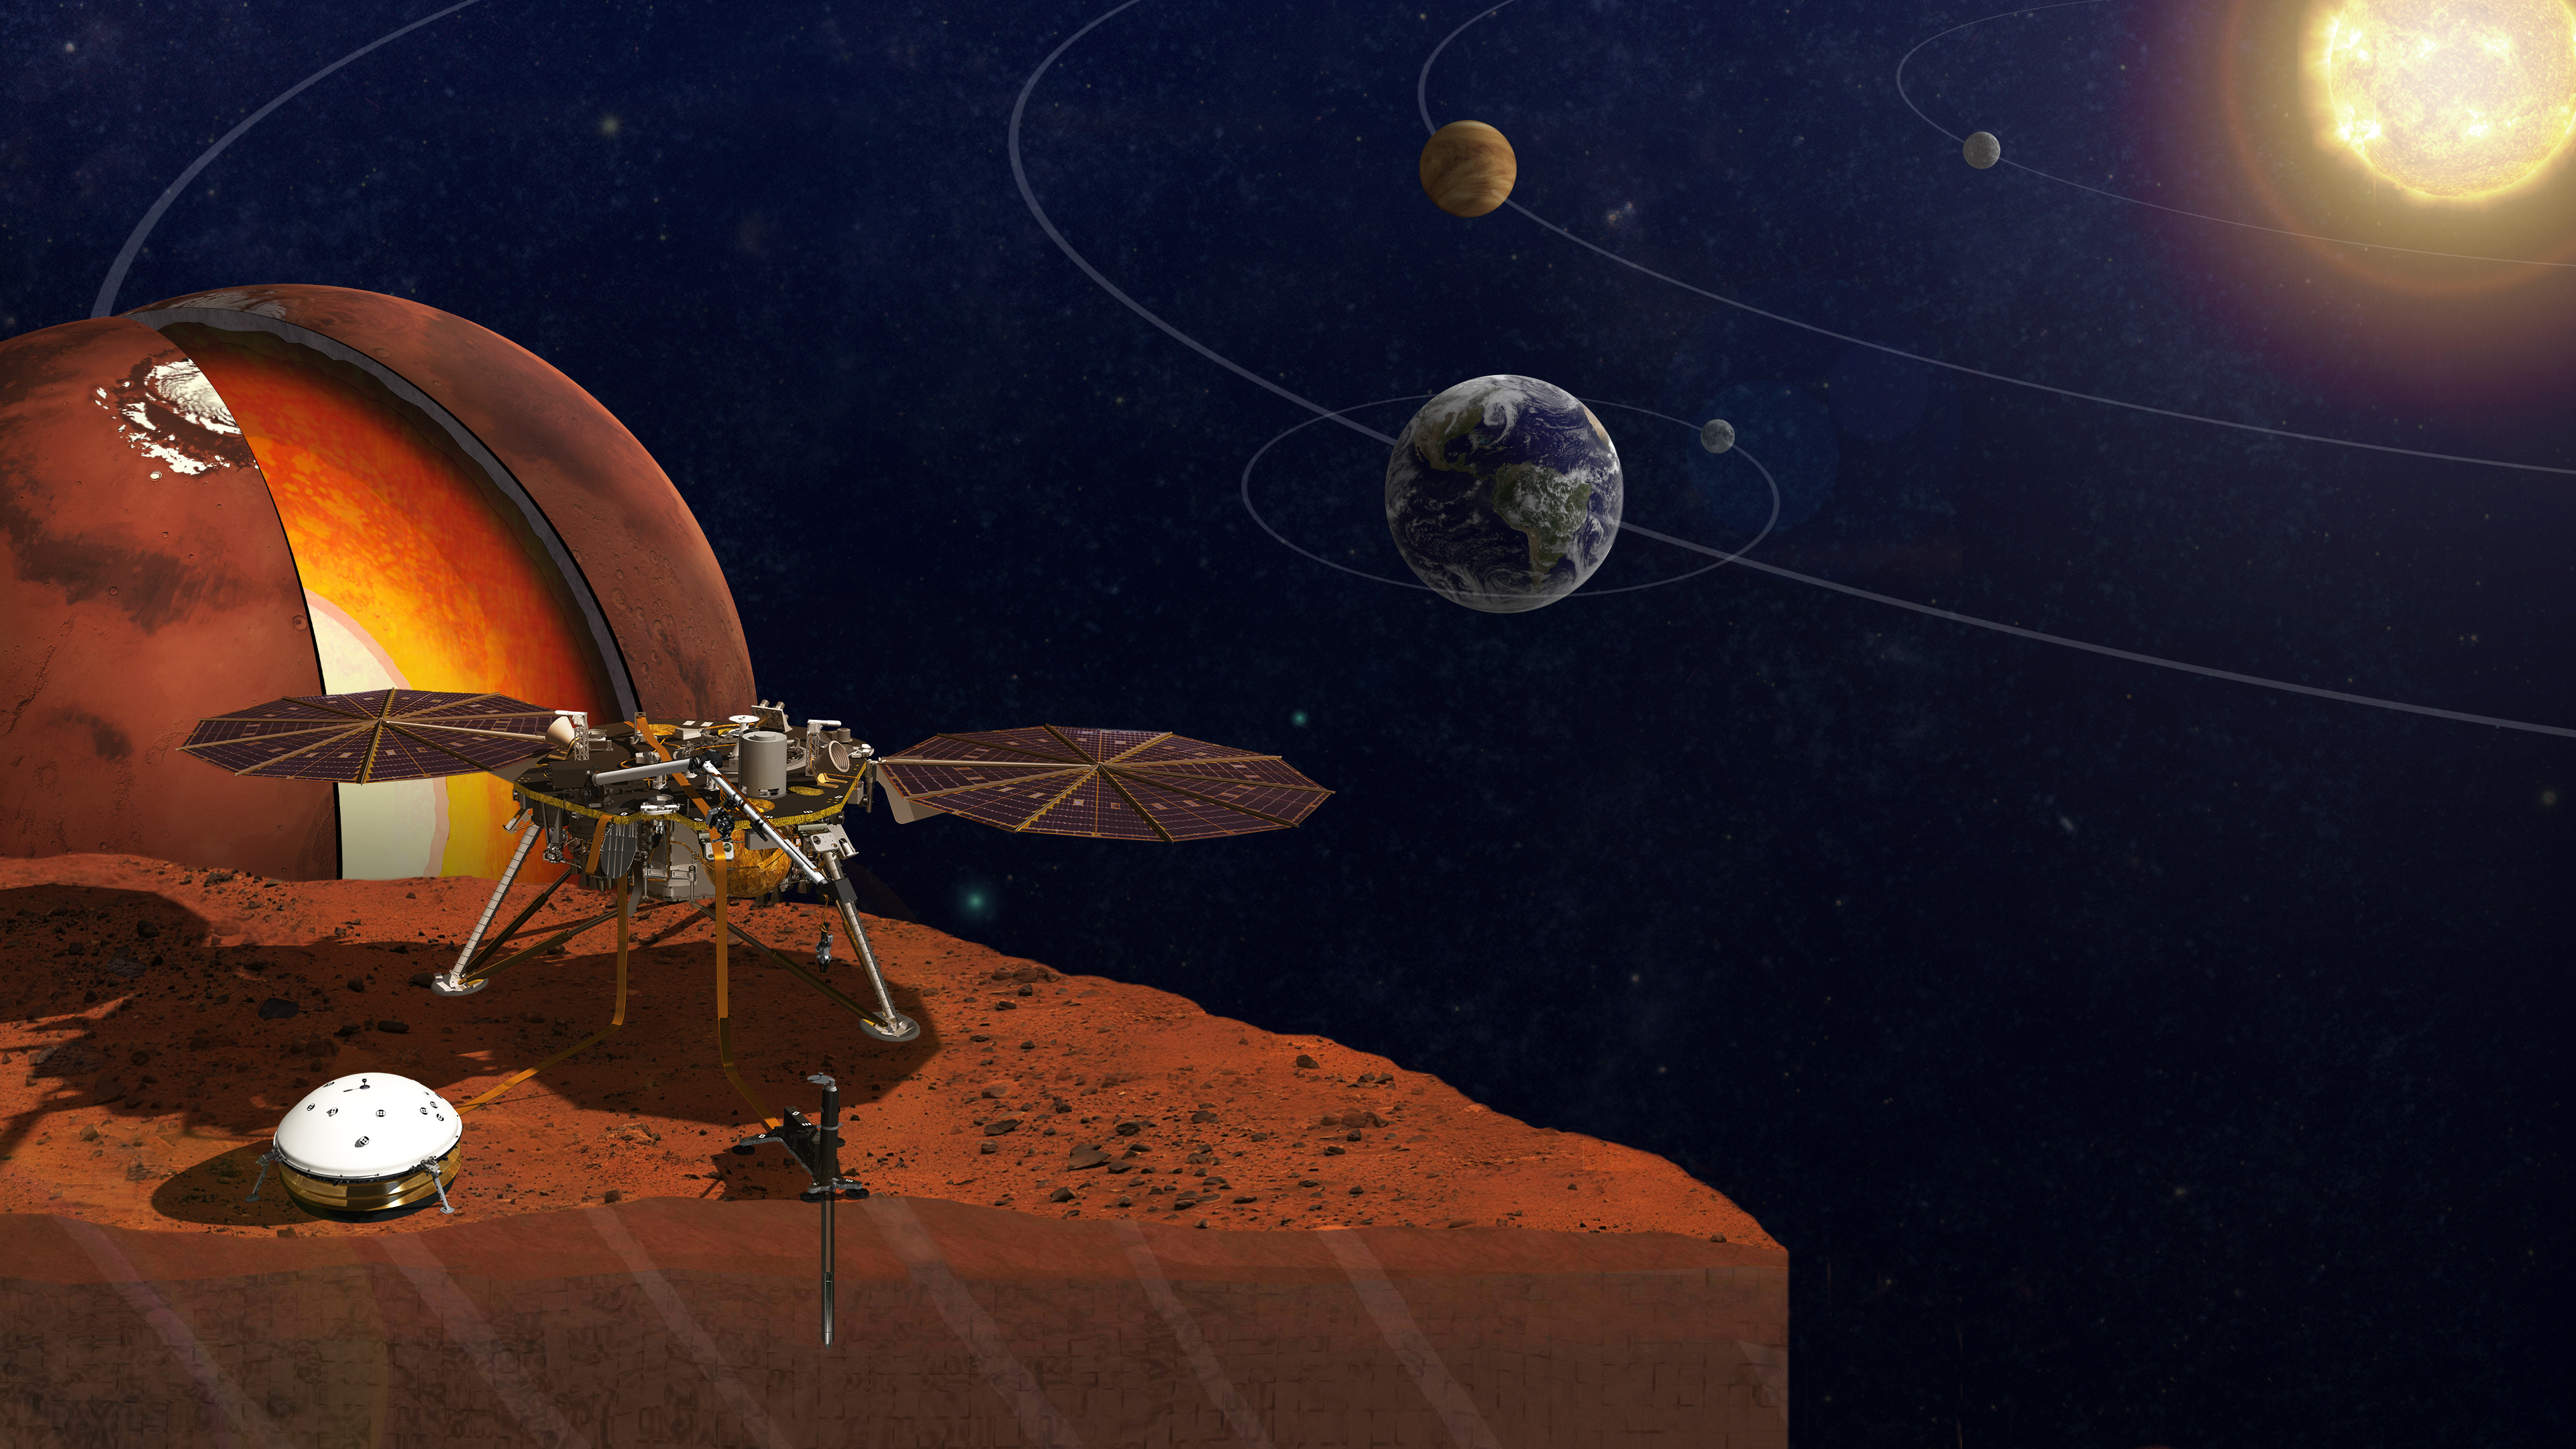 NASA's InSight lander will travel to Mars next year. When it does, it will be carrying two microchips bearing the names of members of the public.